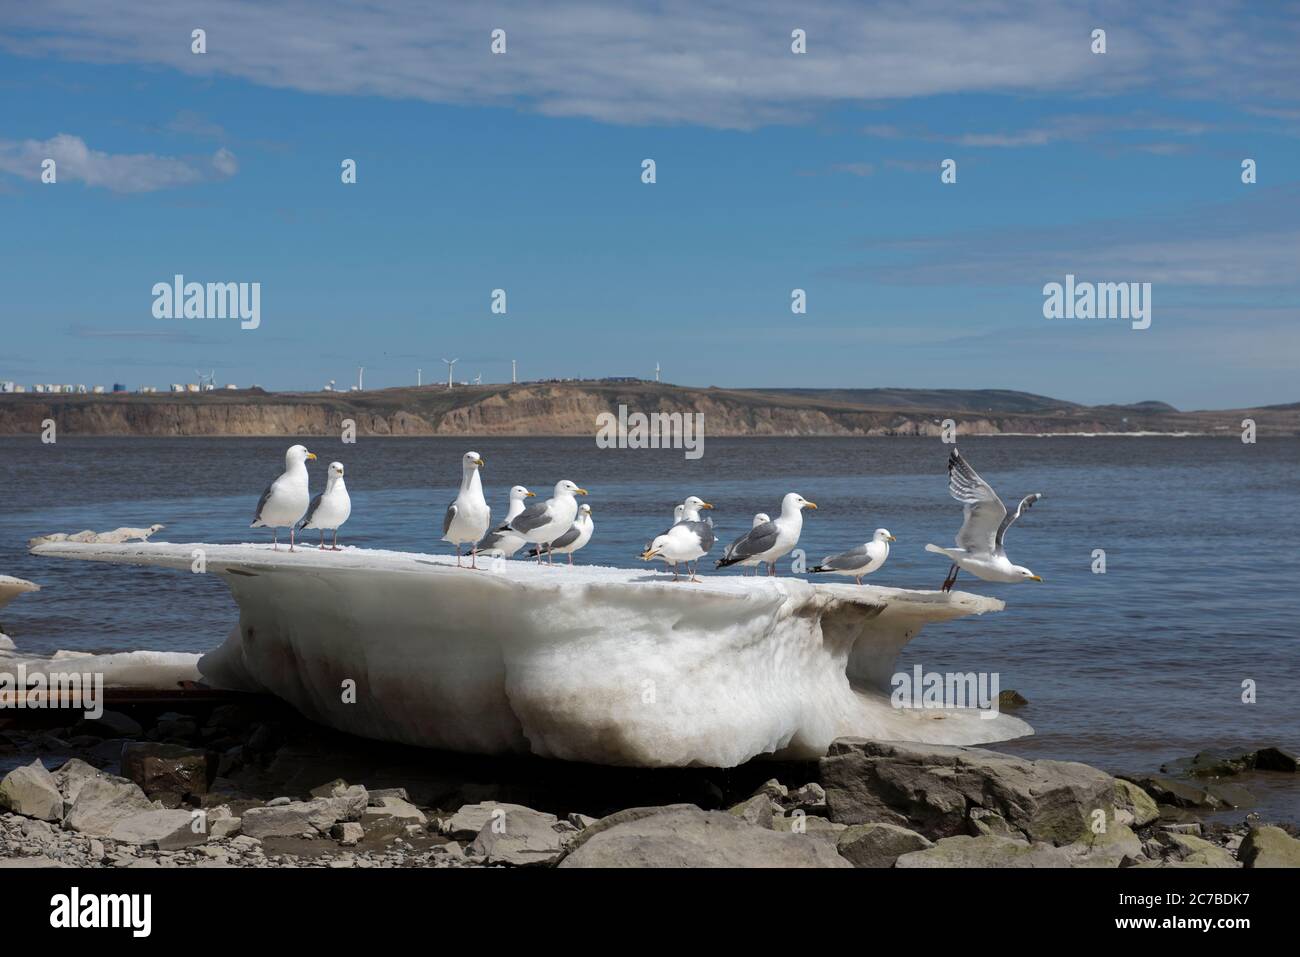 Seagulls on the block of ice on the shore of Bering sea Stock Photo